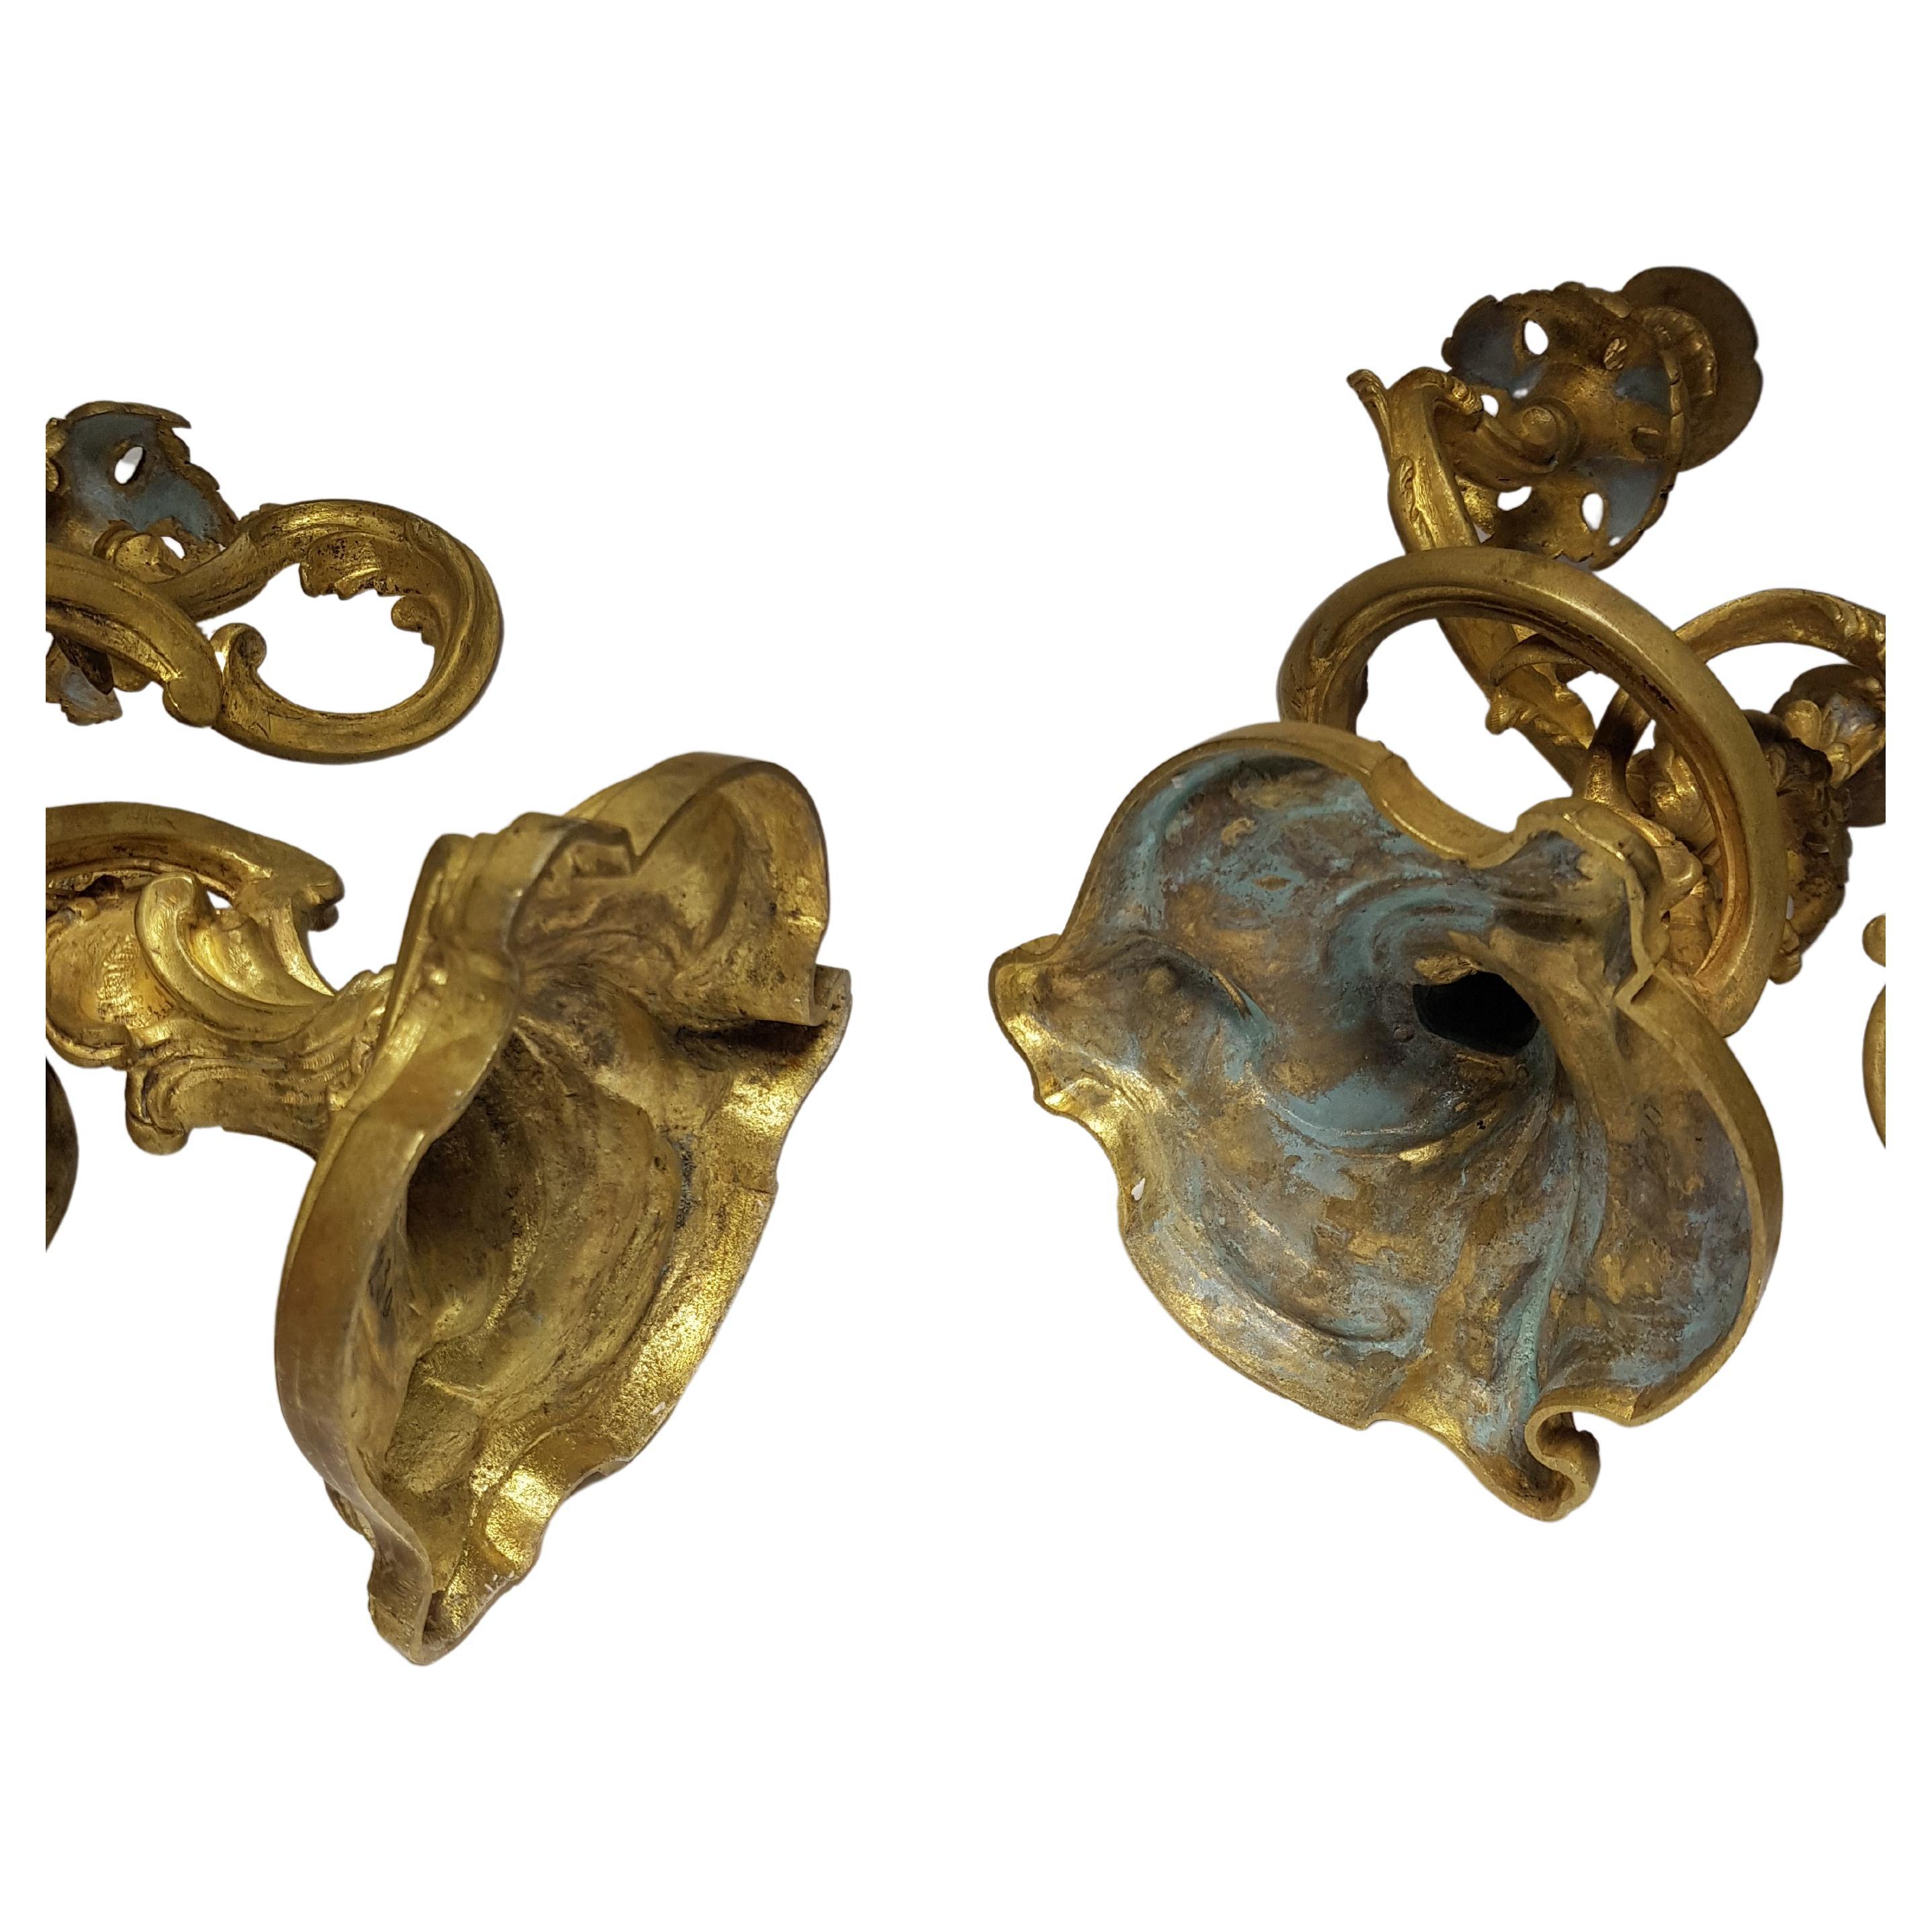 Majestic Brass Candlestick Pair, circa 1870 For Sale 1